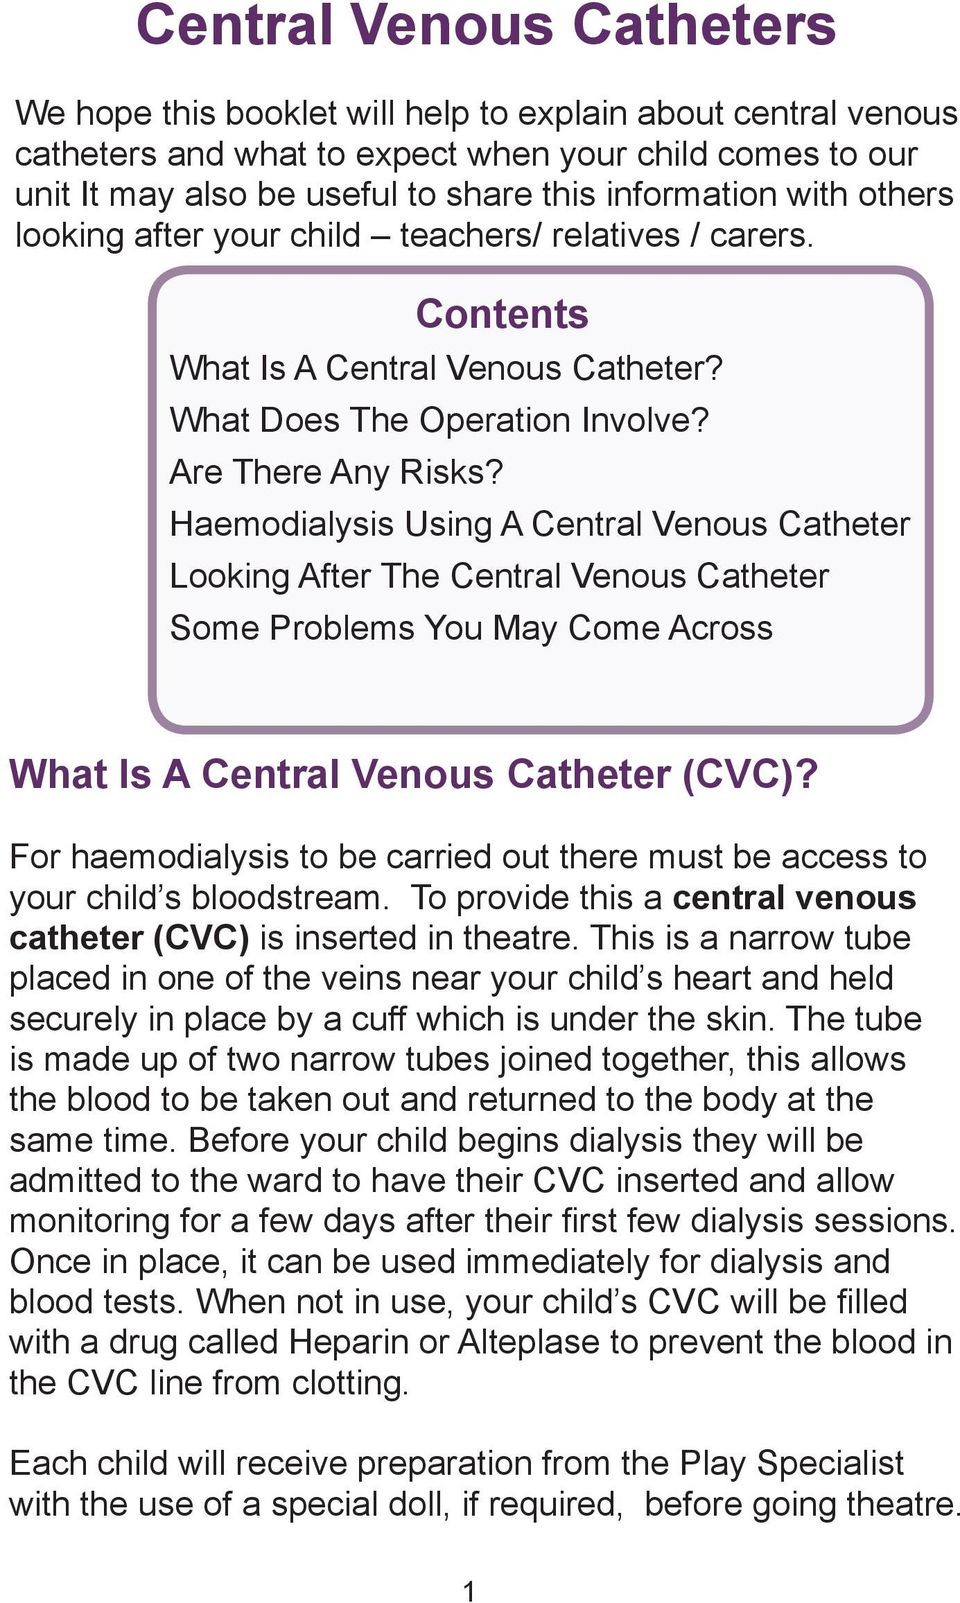 Haemodialysis Using A Central Venous Catheter Looking After The Central Venous Catheter Some Problems You May Come Across What Is A Central Venous Catheter (CVC)?